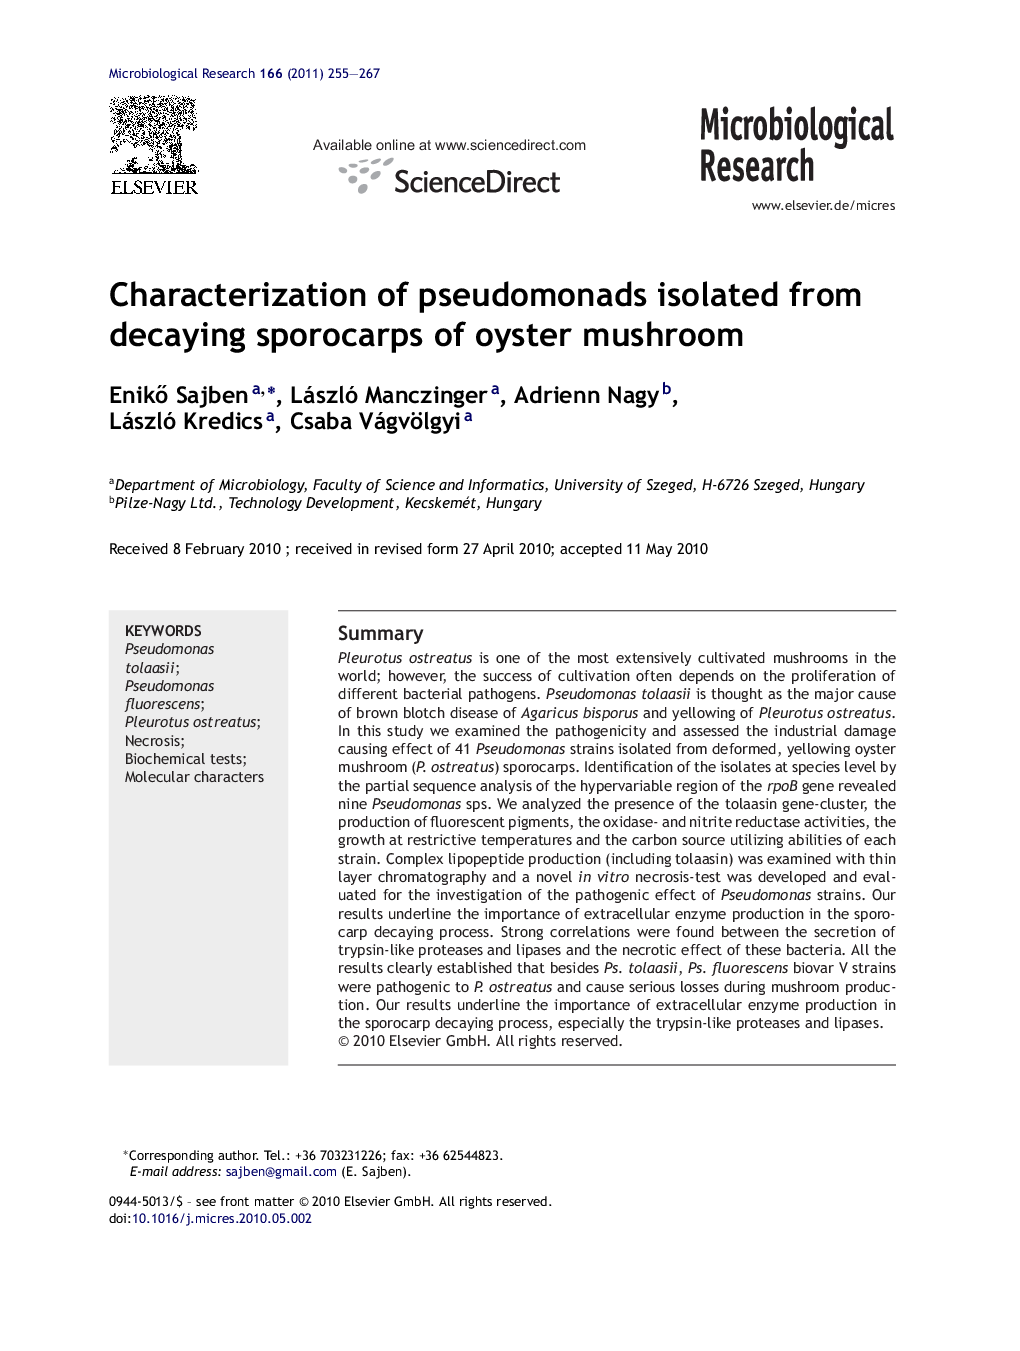 Characterization of pseudomonads isolated from decaying sporocarps of oyster mushroom